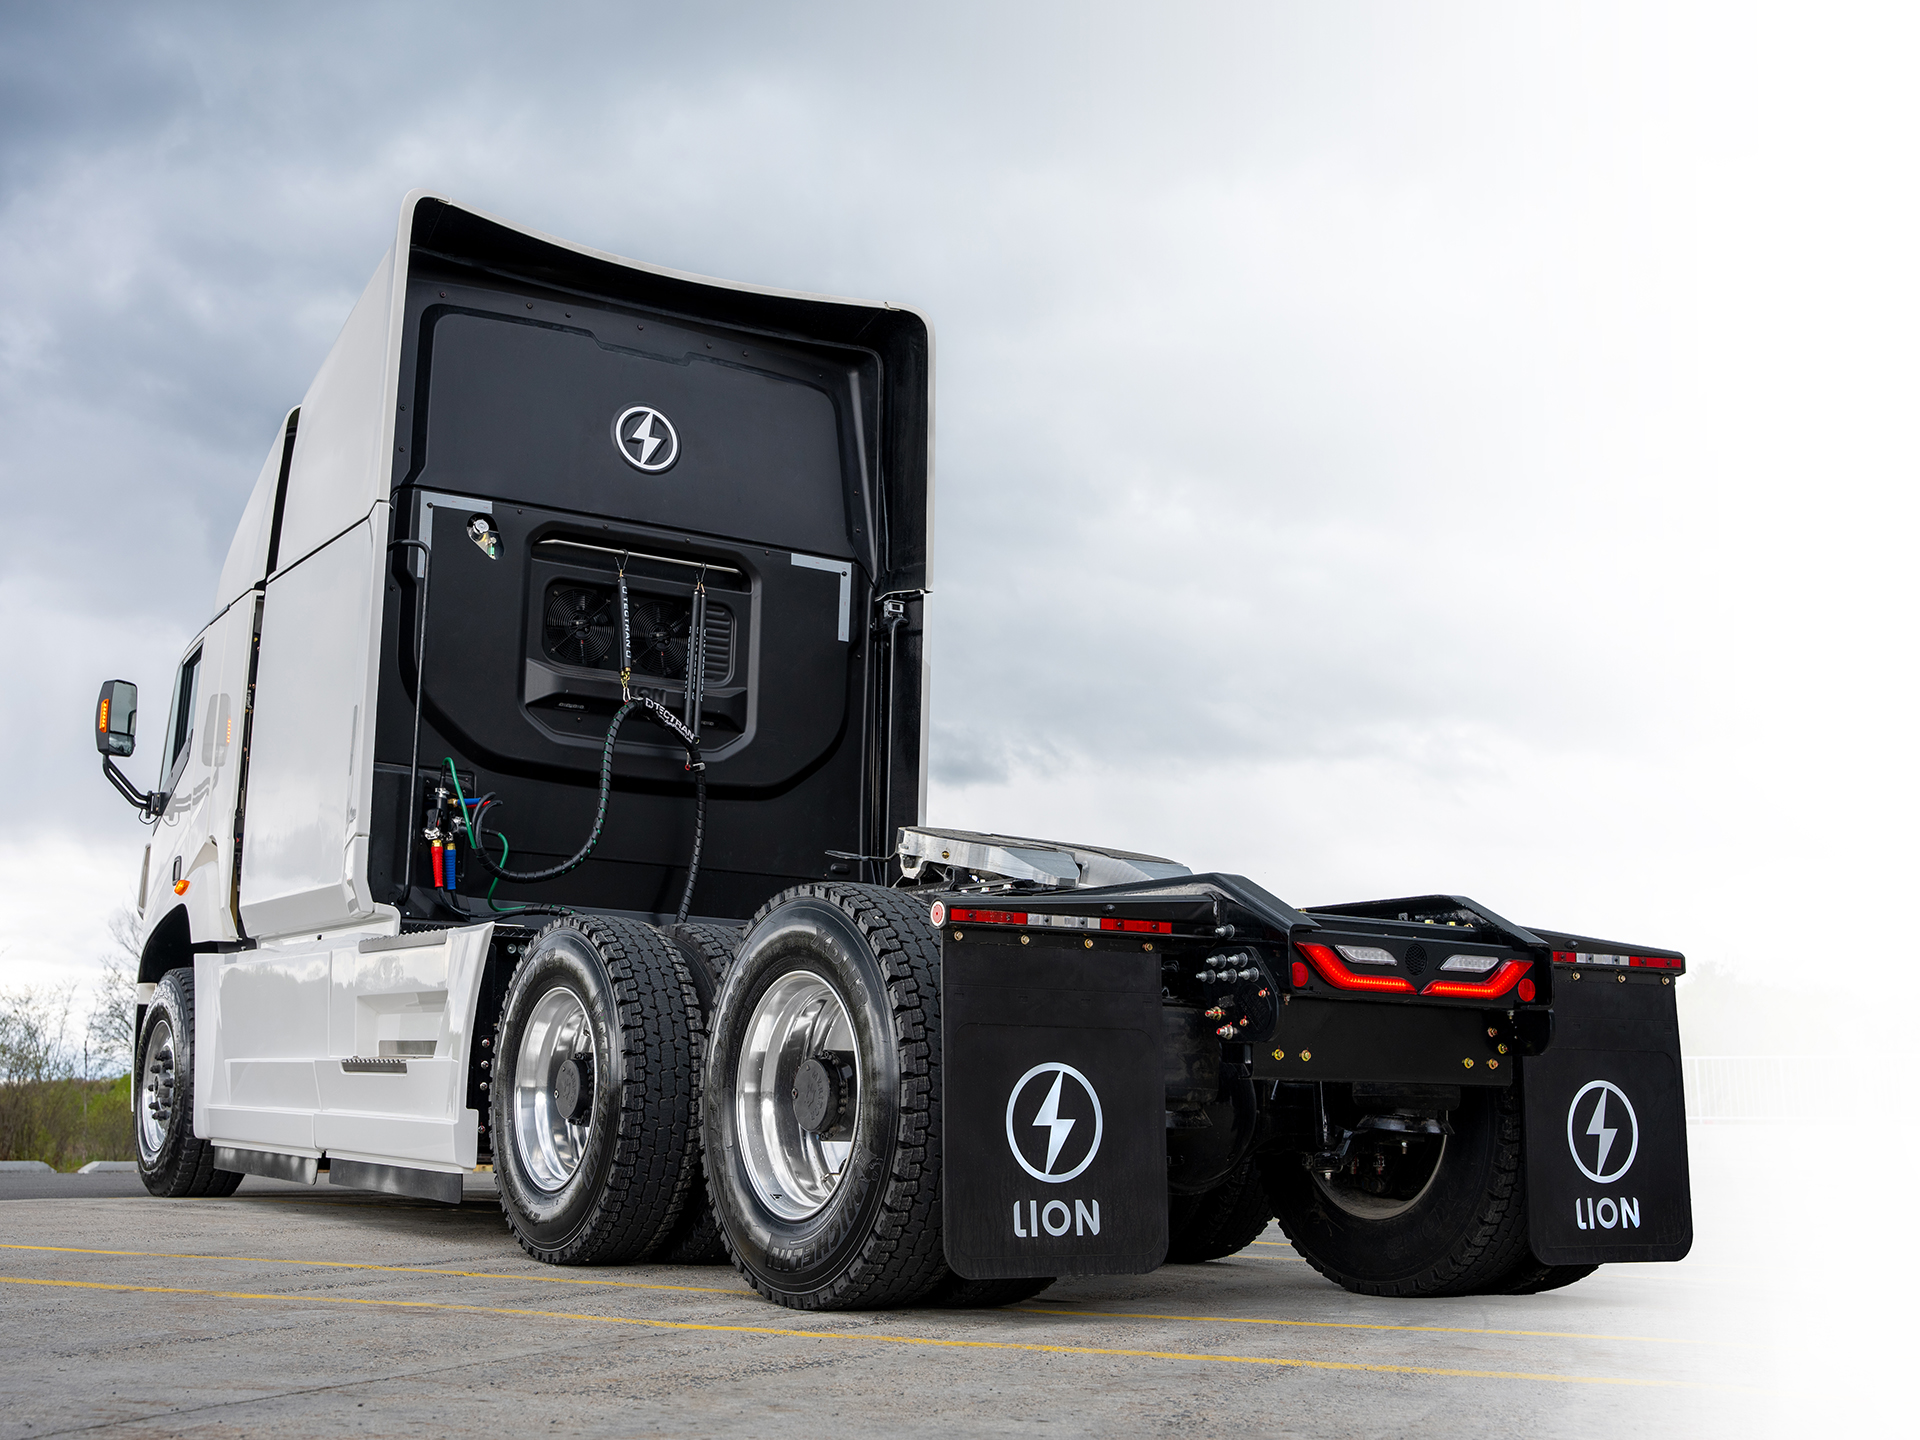 Lion8Tractor, the all-electric semi-electric truck by Lion Electric, hero shot